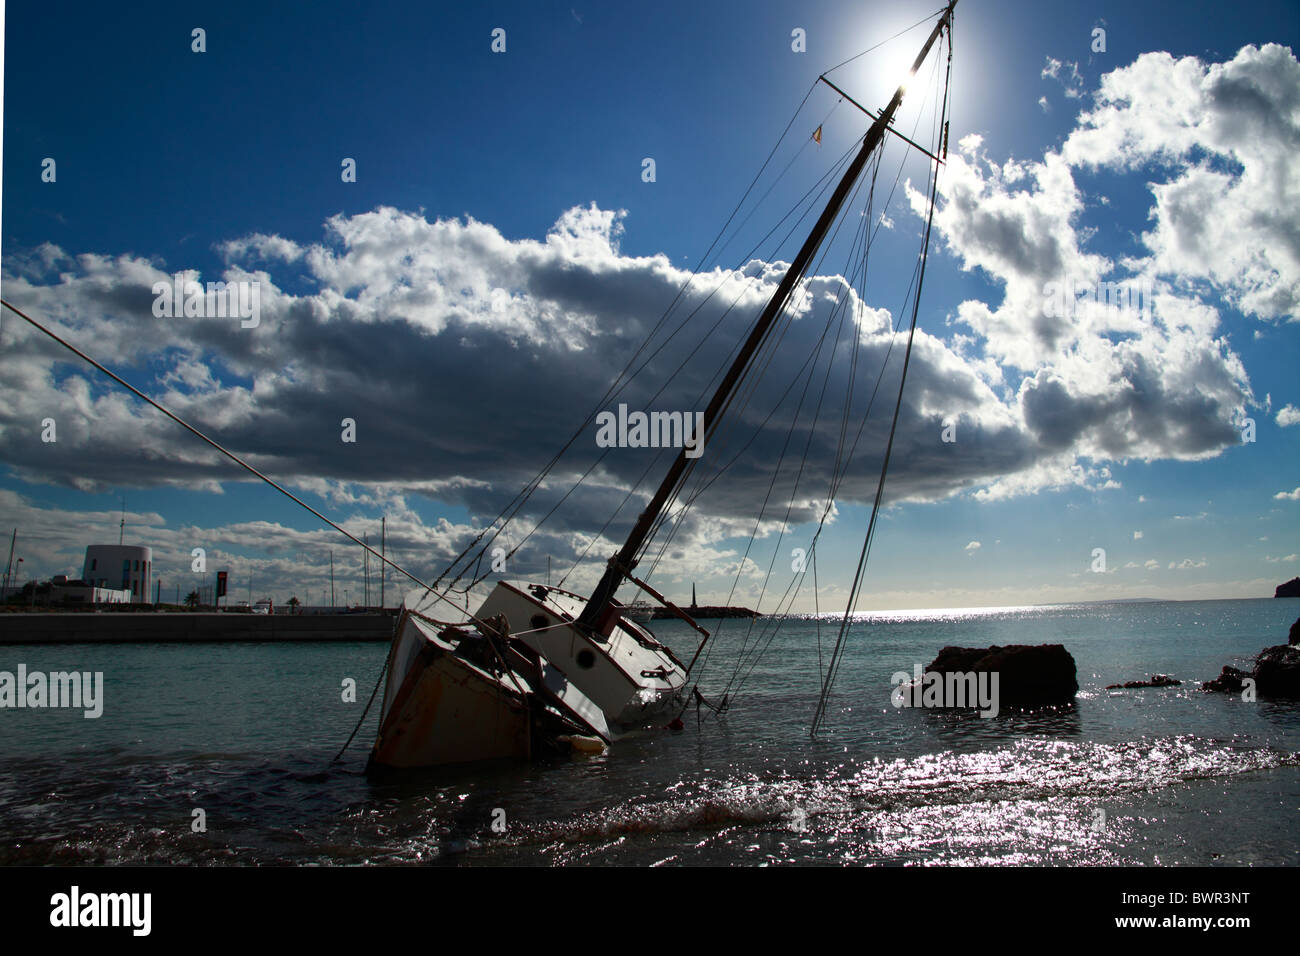 Contre-jour view of a wrecked sailing boat Stock Photo